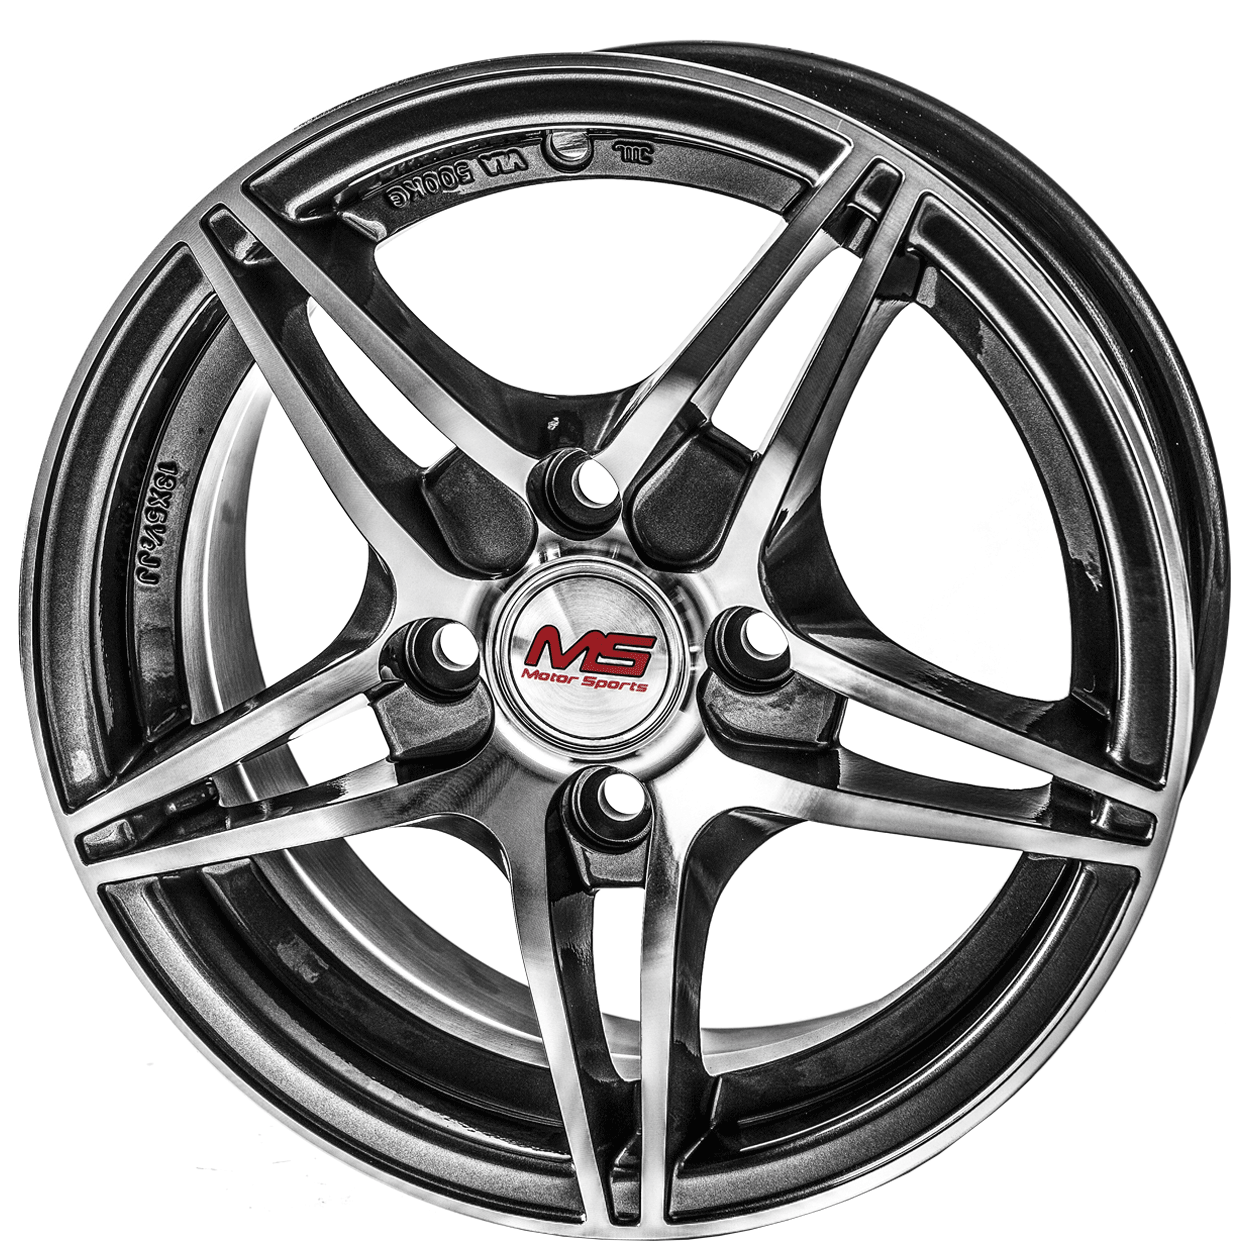 Https rs24 ru product. D4 Sport Design. Sport-004. AGL Motorsports. R R collection.